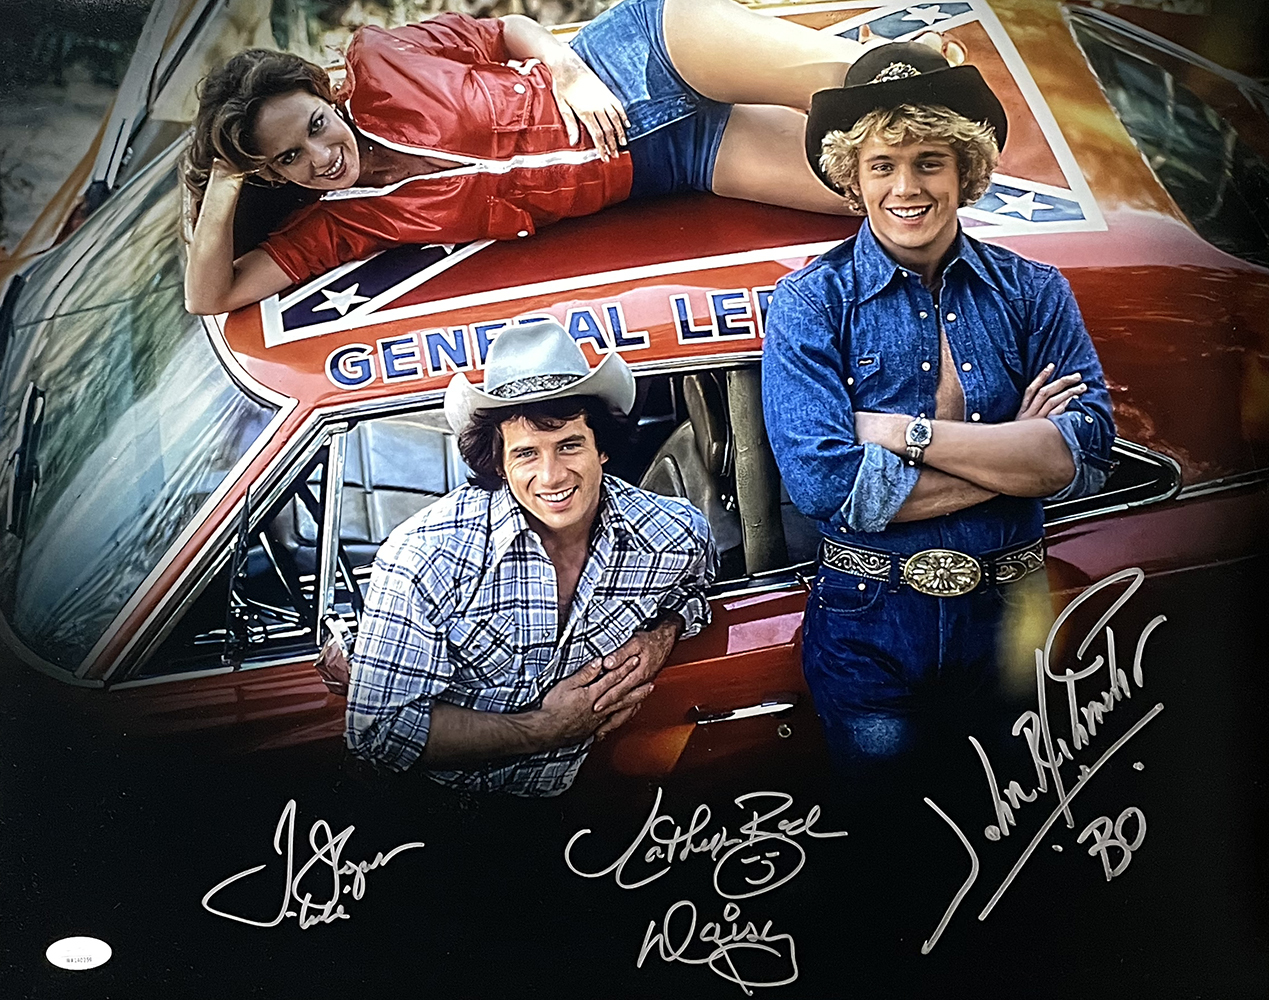 Primary image for Schneider Wopat Bach Signed 16x20 Dukes of Hazzard General Lee Photo JSA